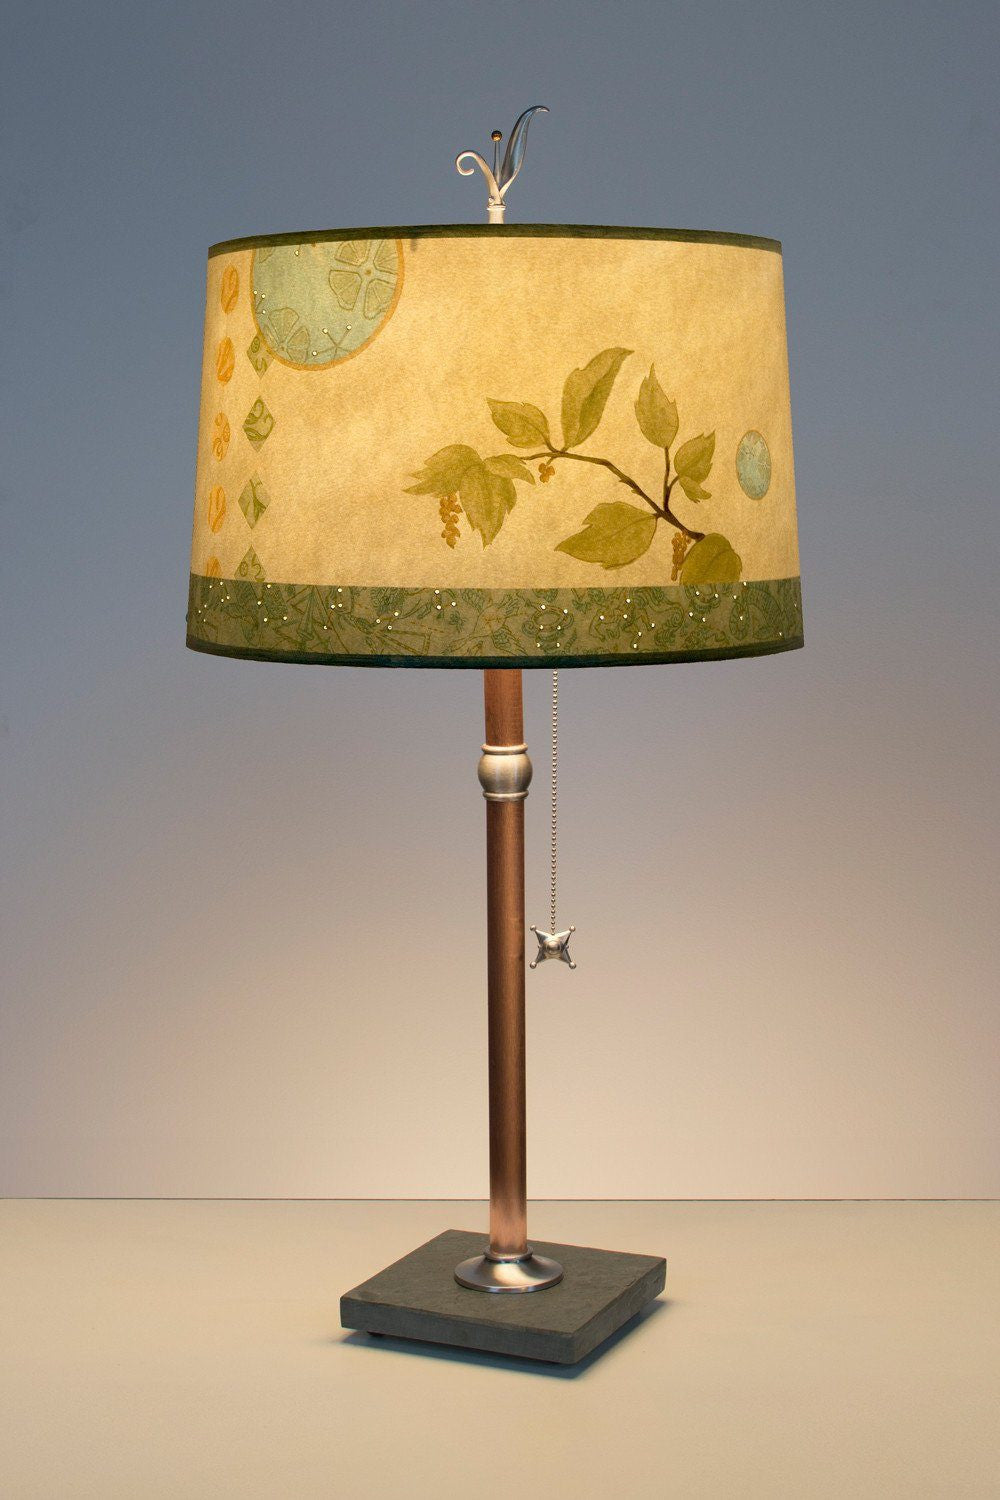 Janna Ugone & Co Table Lamps Copper Table Lamp with Large Drum Shade in Celestial Leaf